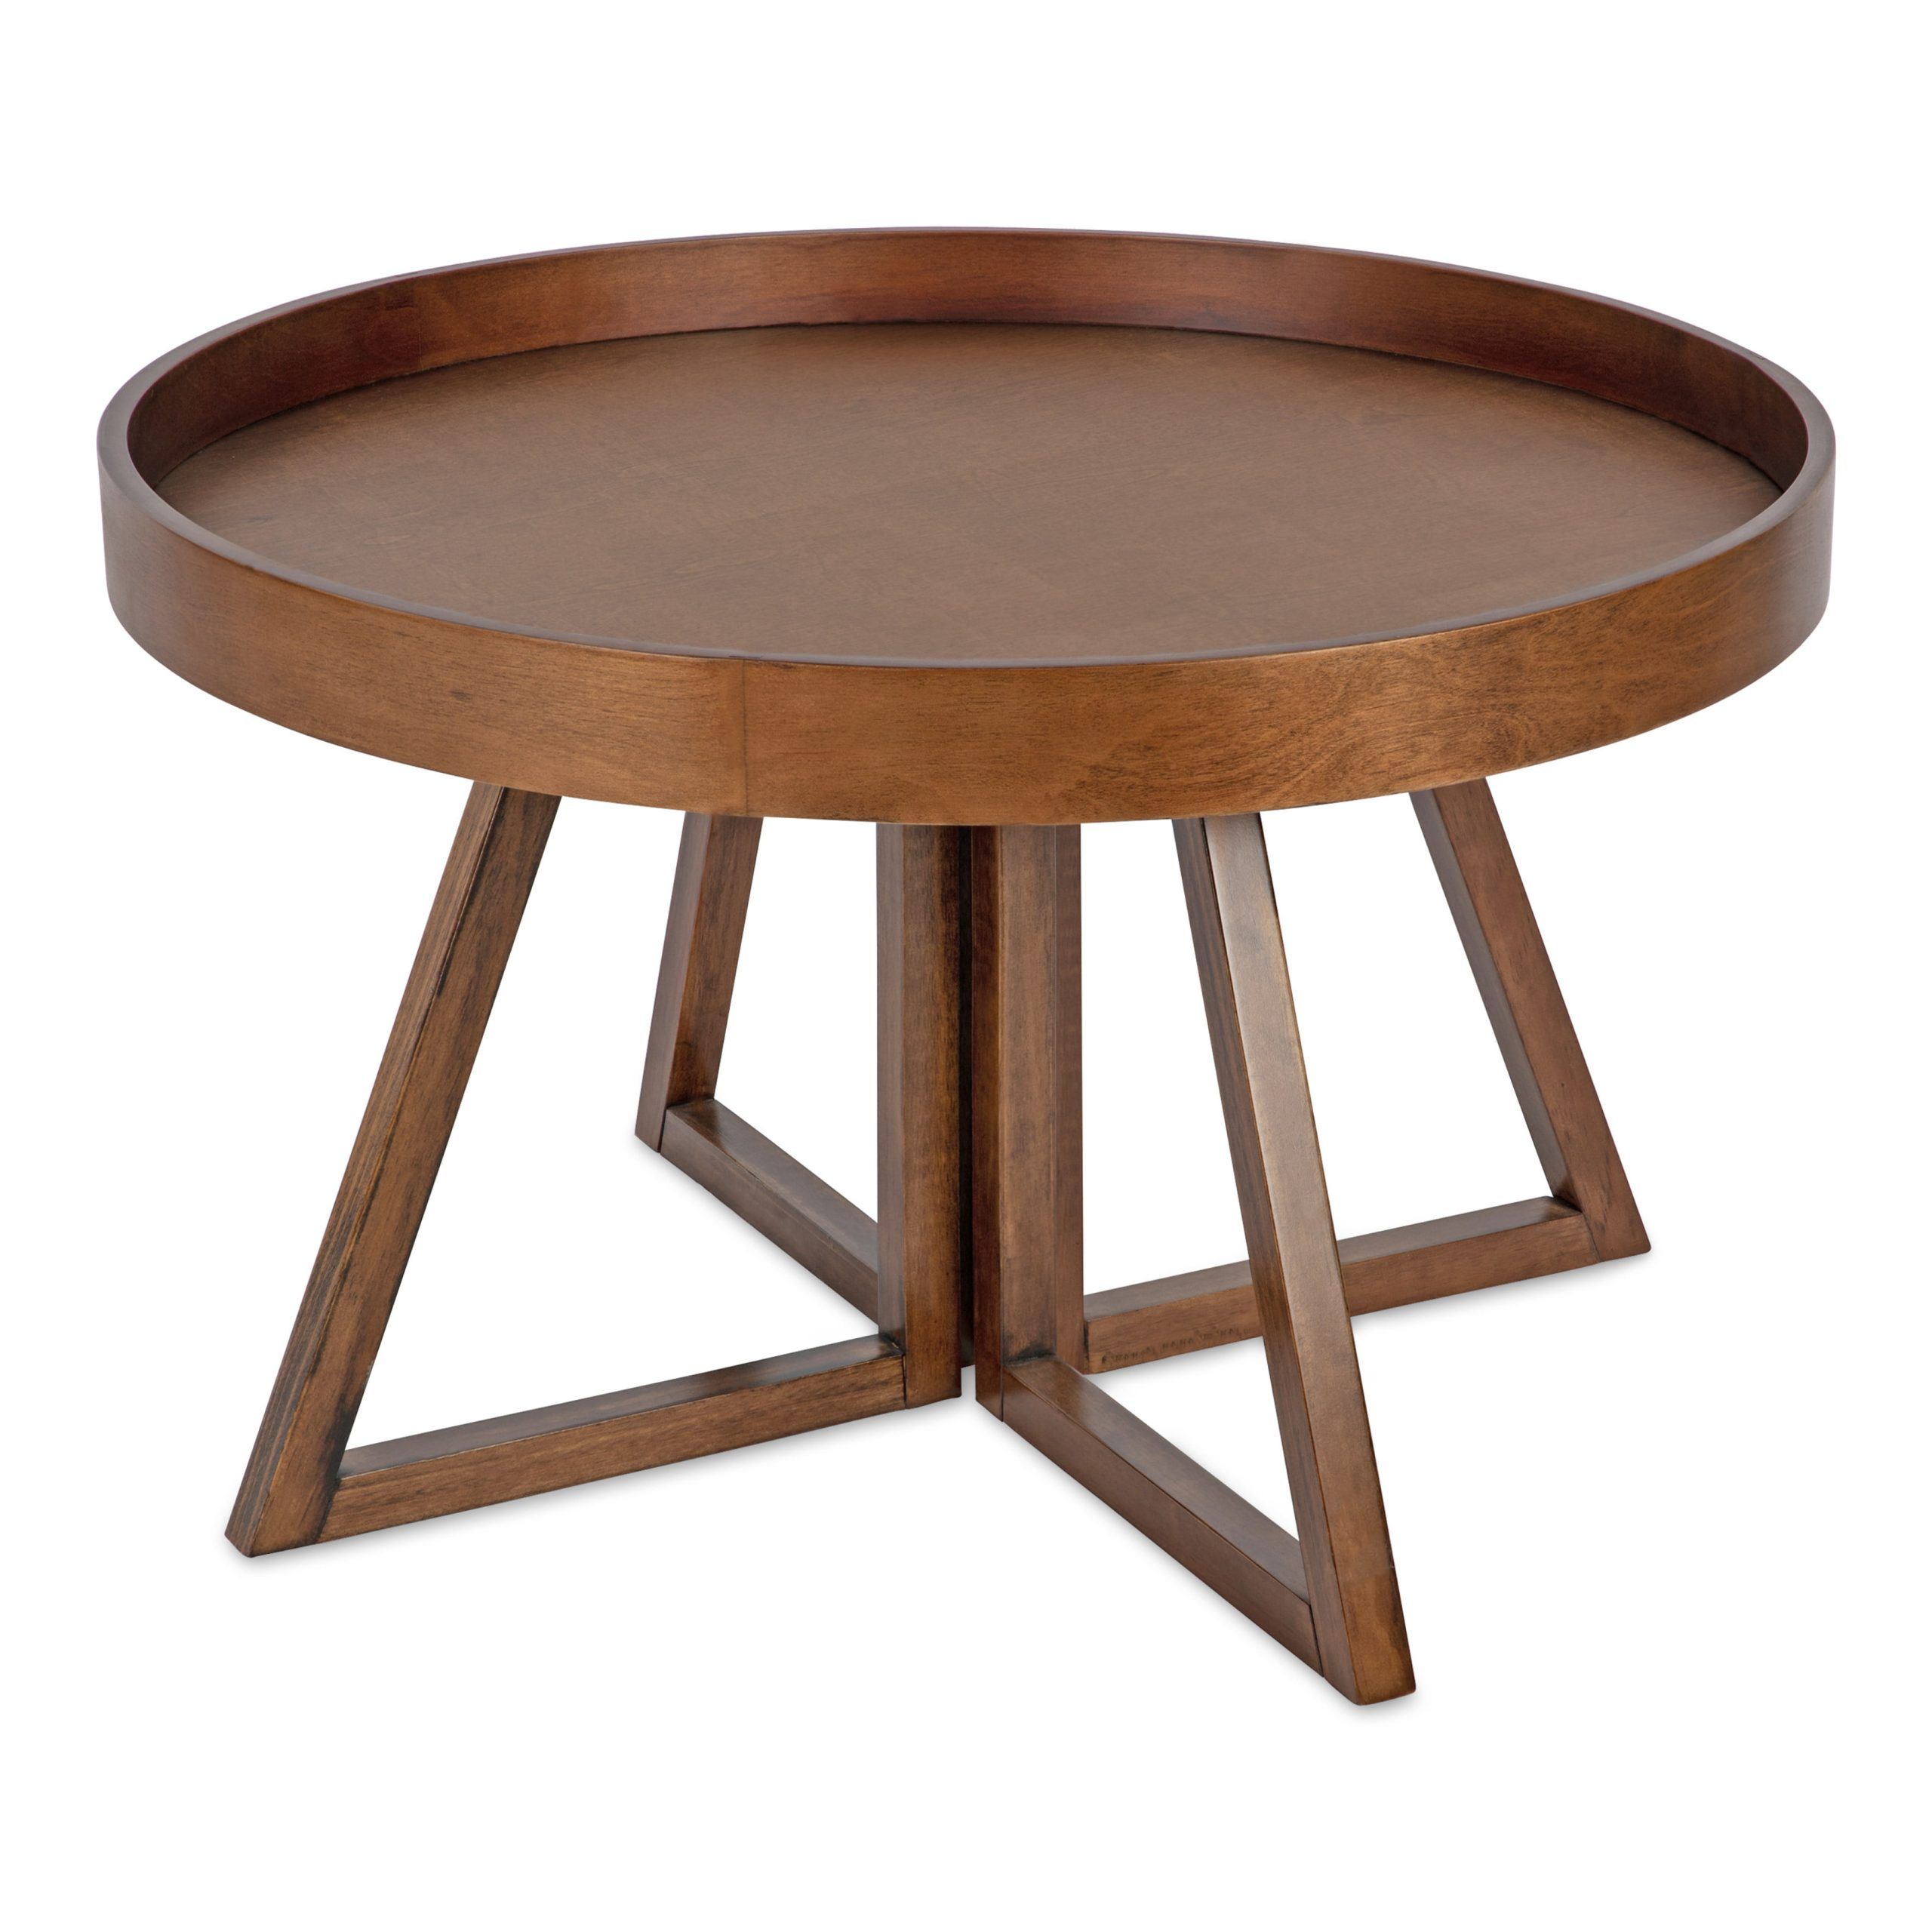 Most Popular Coffee Tables For 4 6 People With Regard To Kate And Laurel Avery Modern Round Coffee Table, 30" X 30" X  (View 7 of 15)